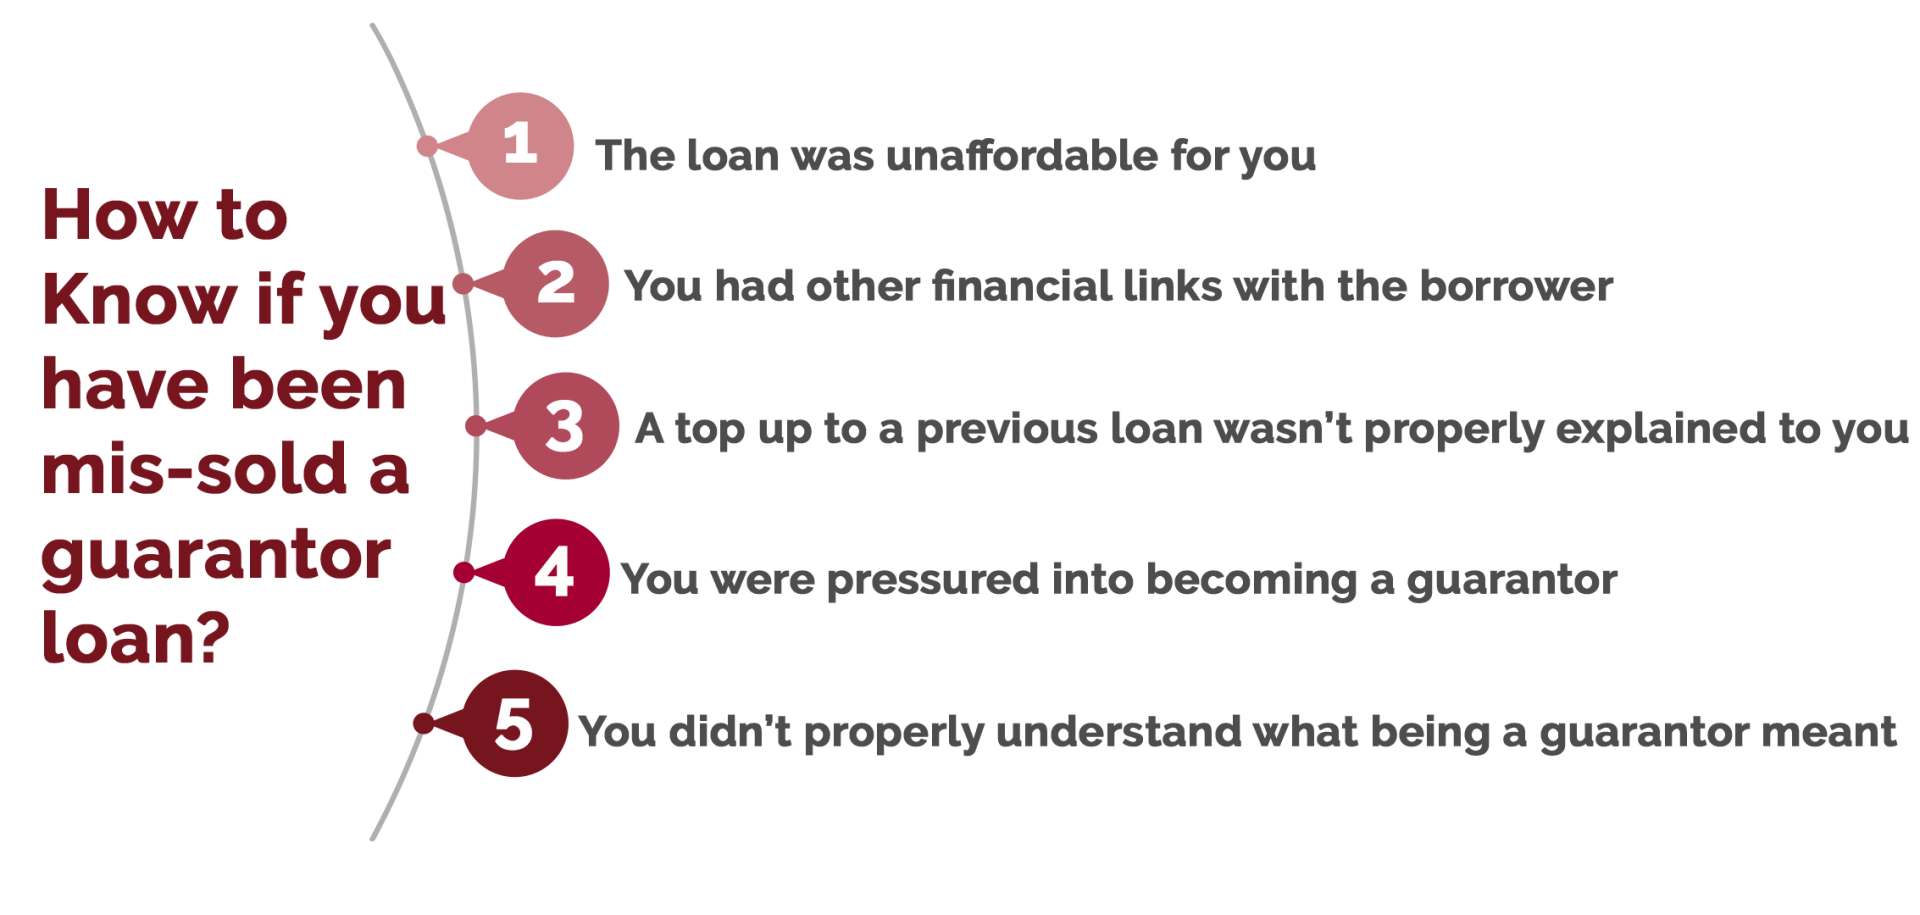 How to know if you have been mis-sold a guarantor loan